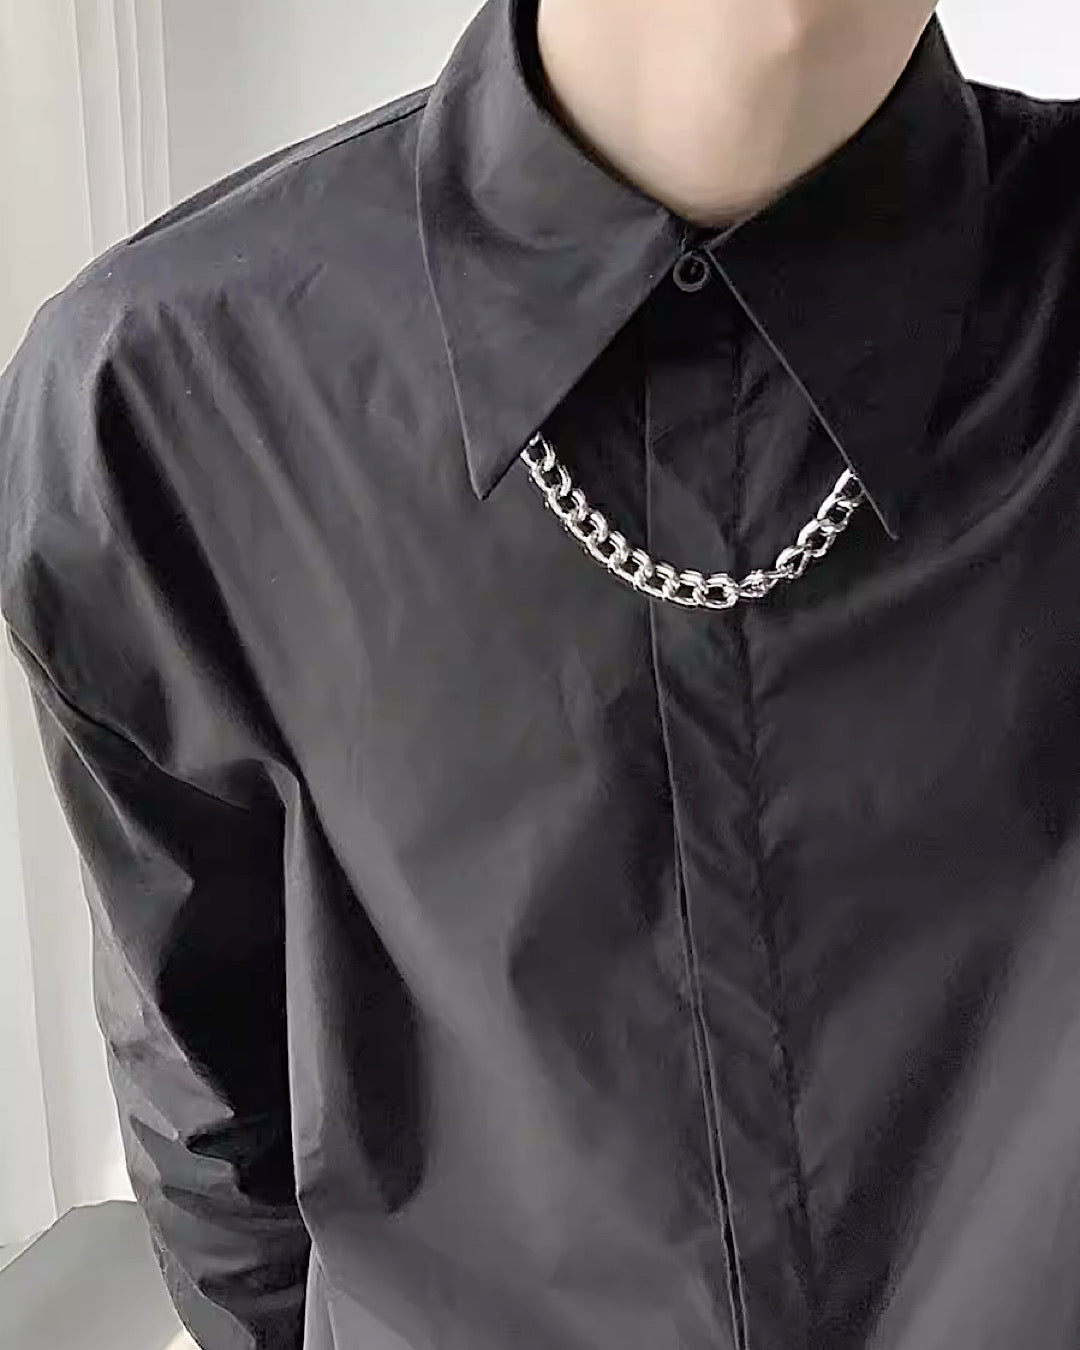 【QUANY】Simple design chain necklace long sleeve shirt  QU0012